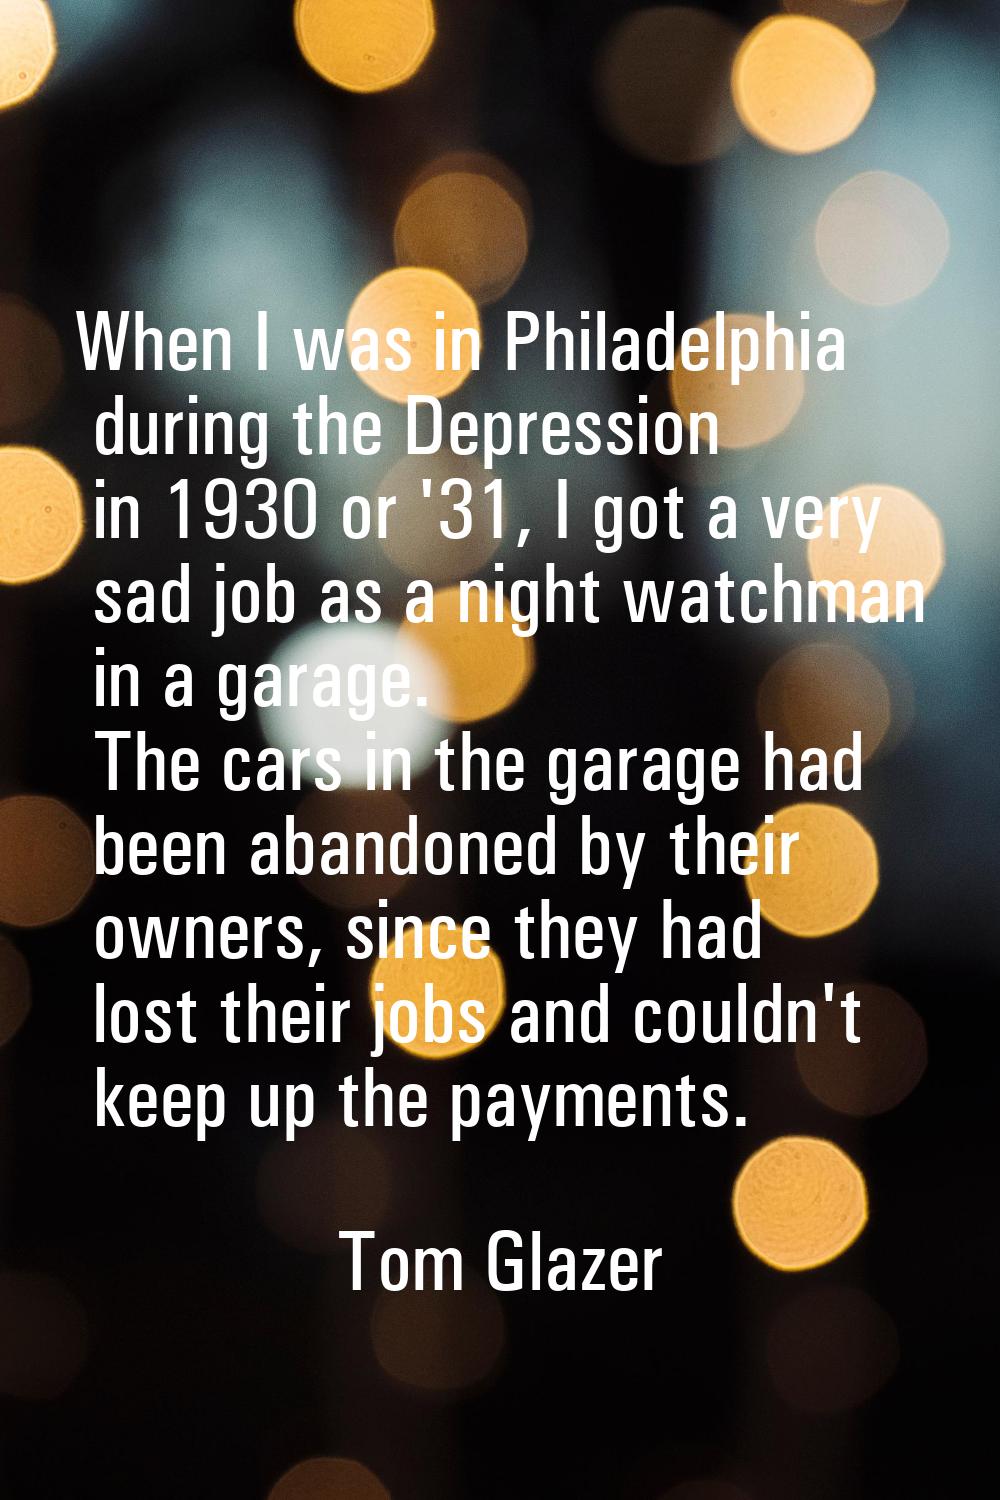 When I was in Philadelphia during the Depression in 1930 or '31, I got a very sad job as a night wa